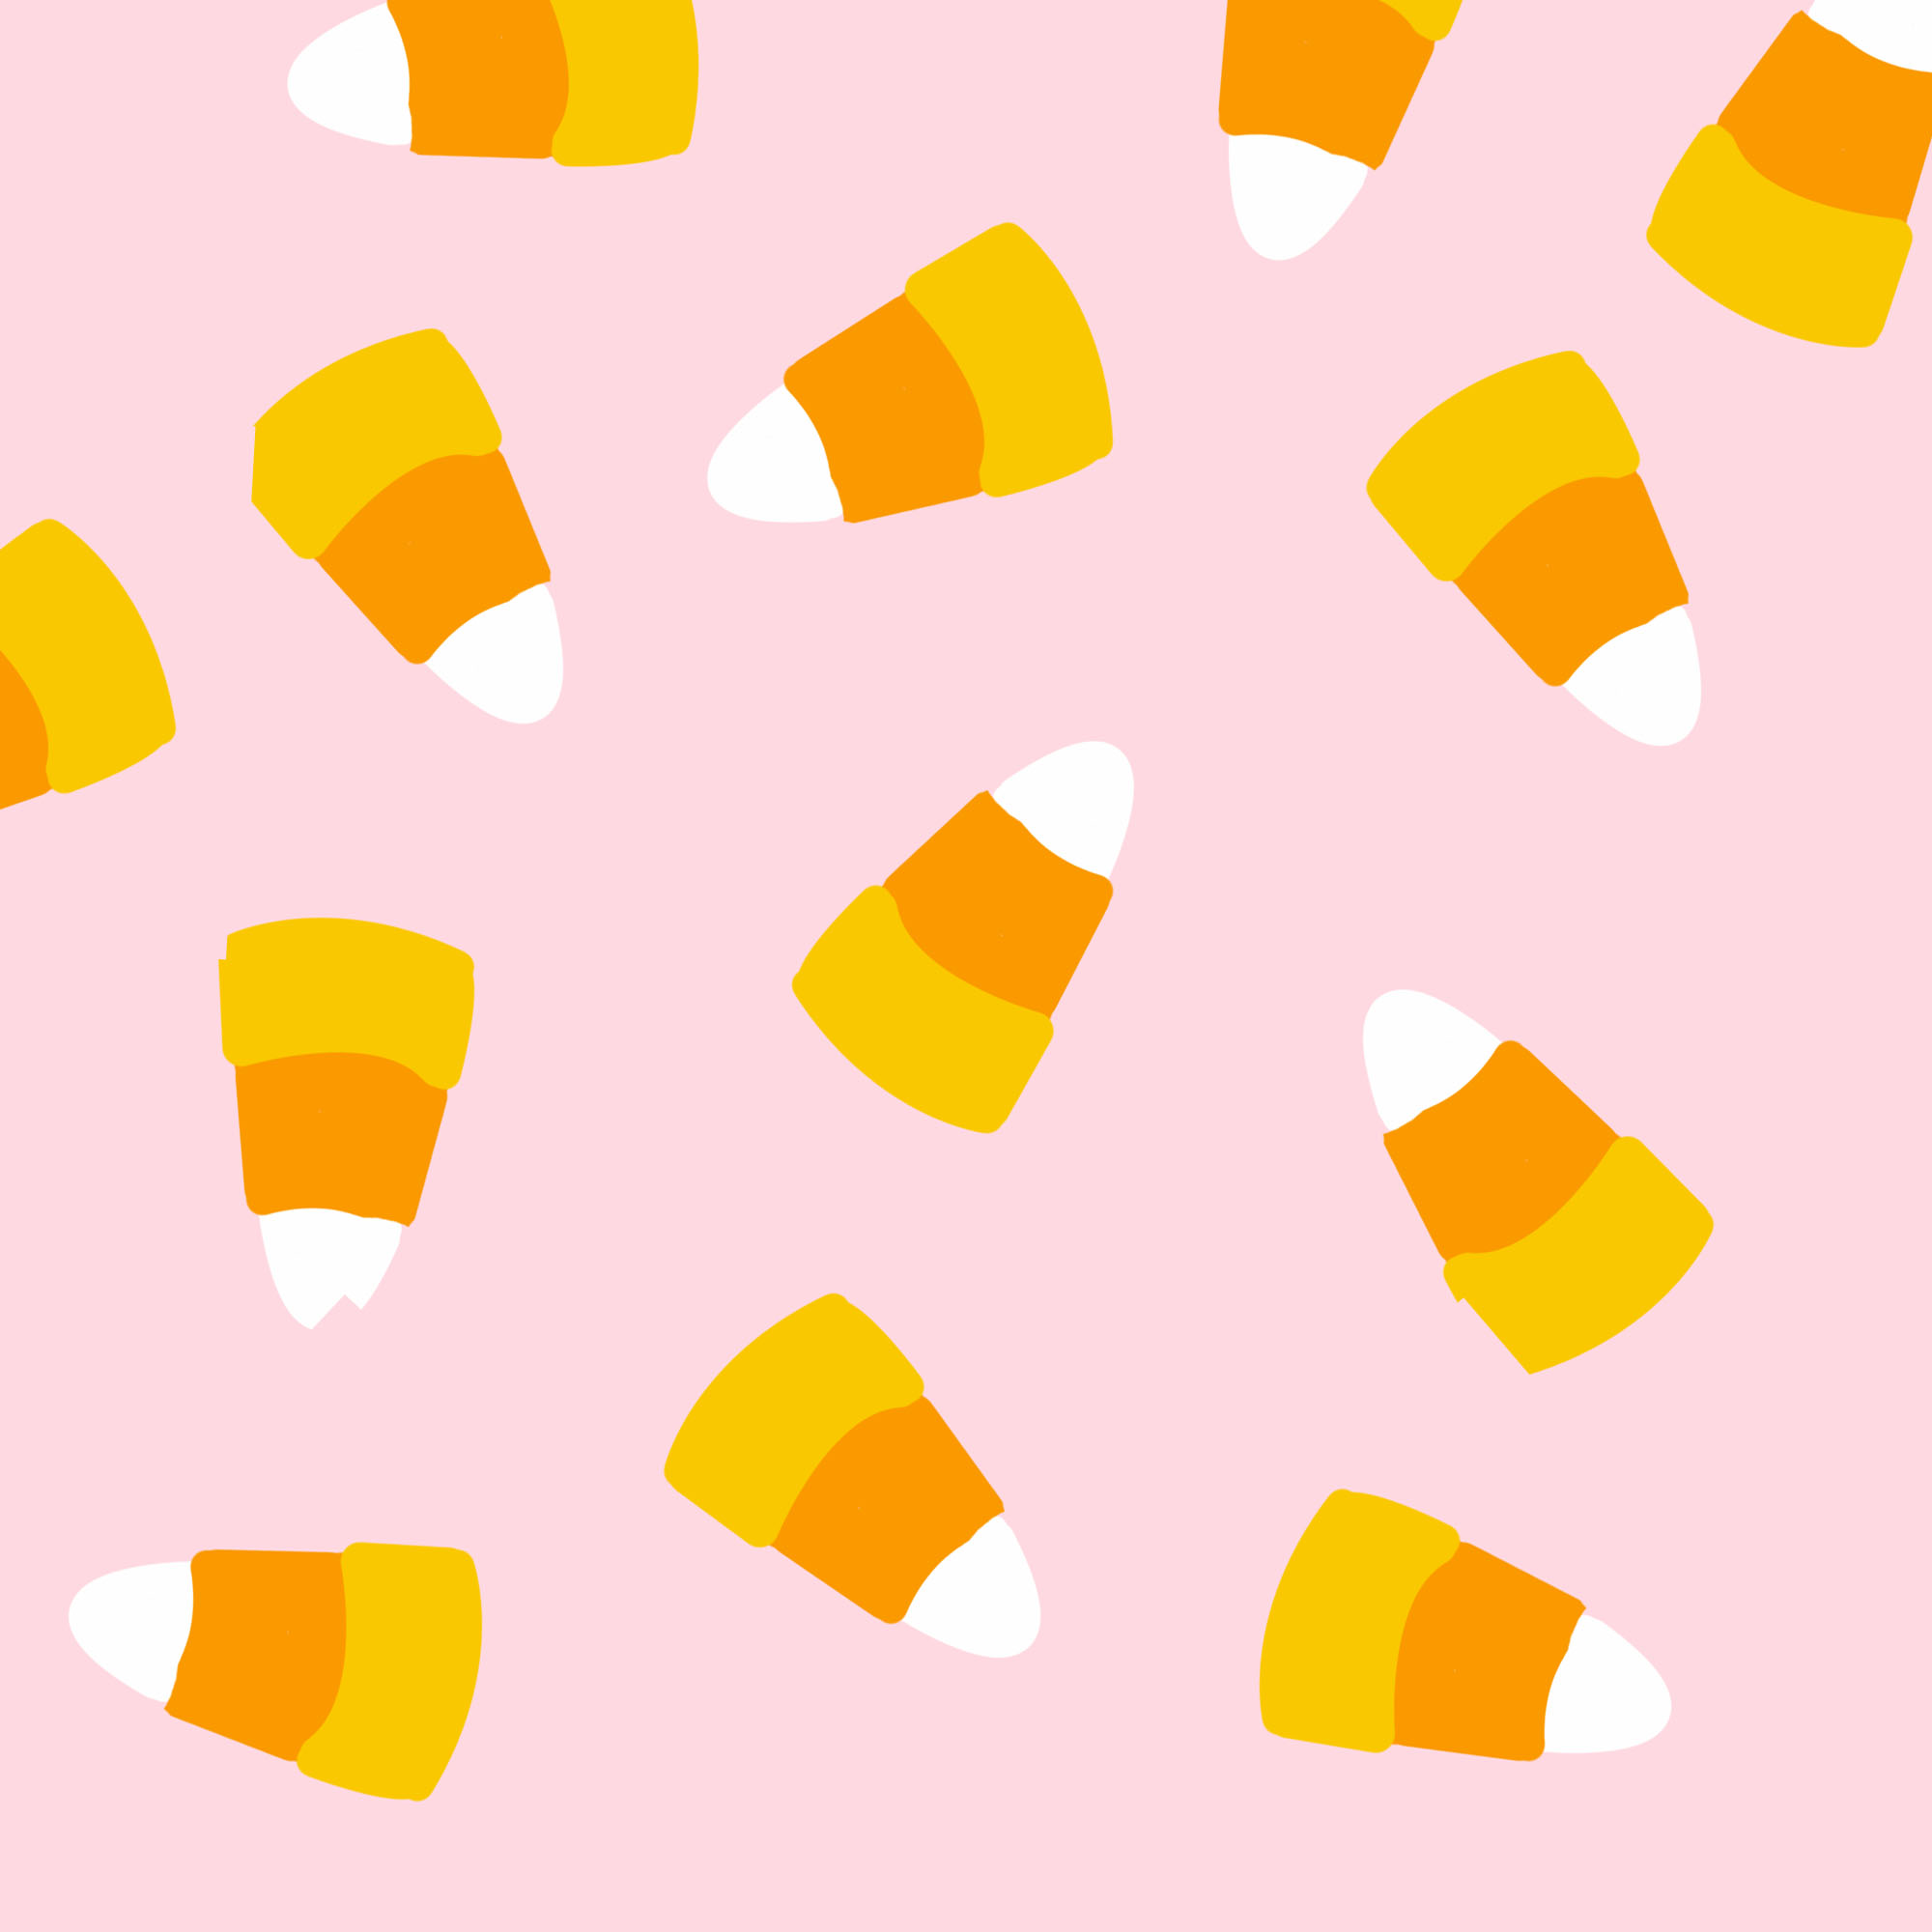 A pattern of candy corn on pink background - Candy